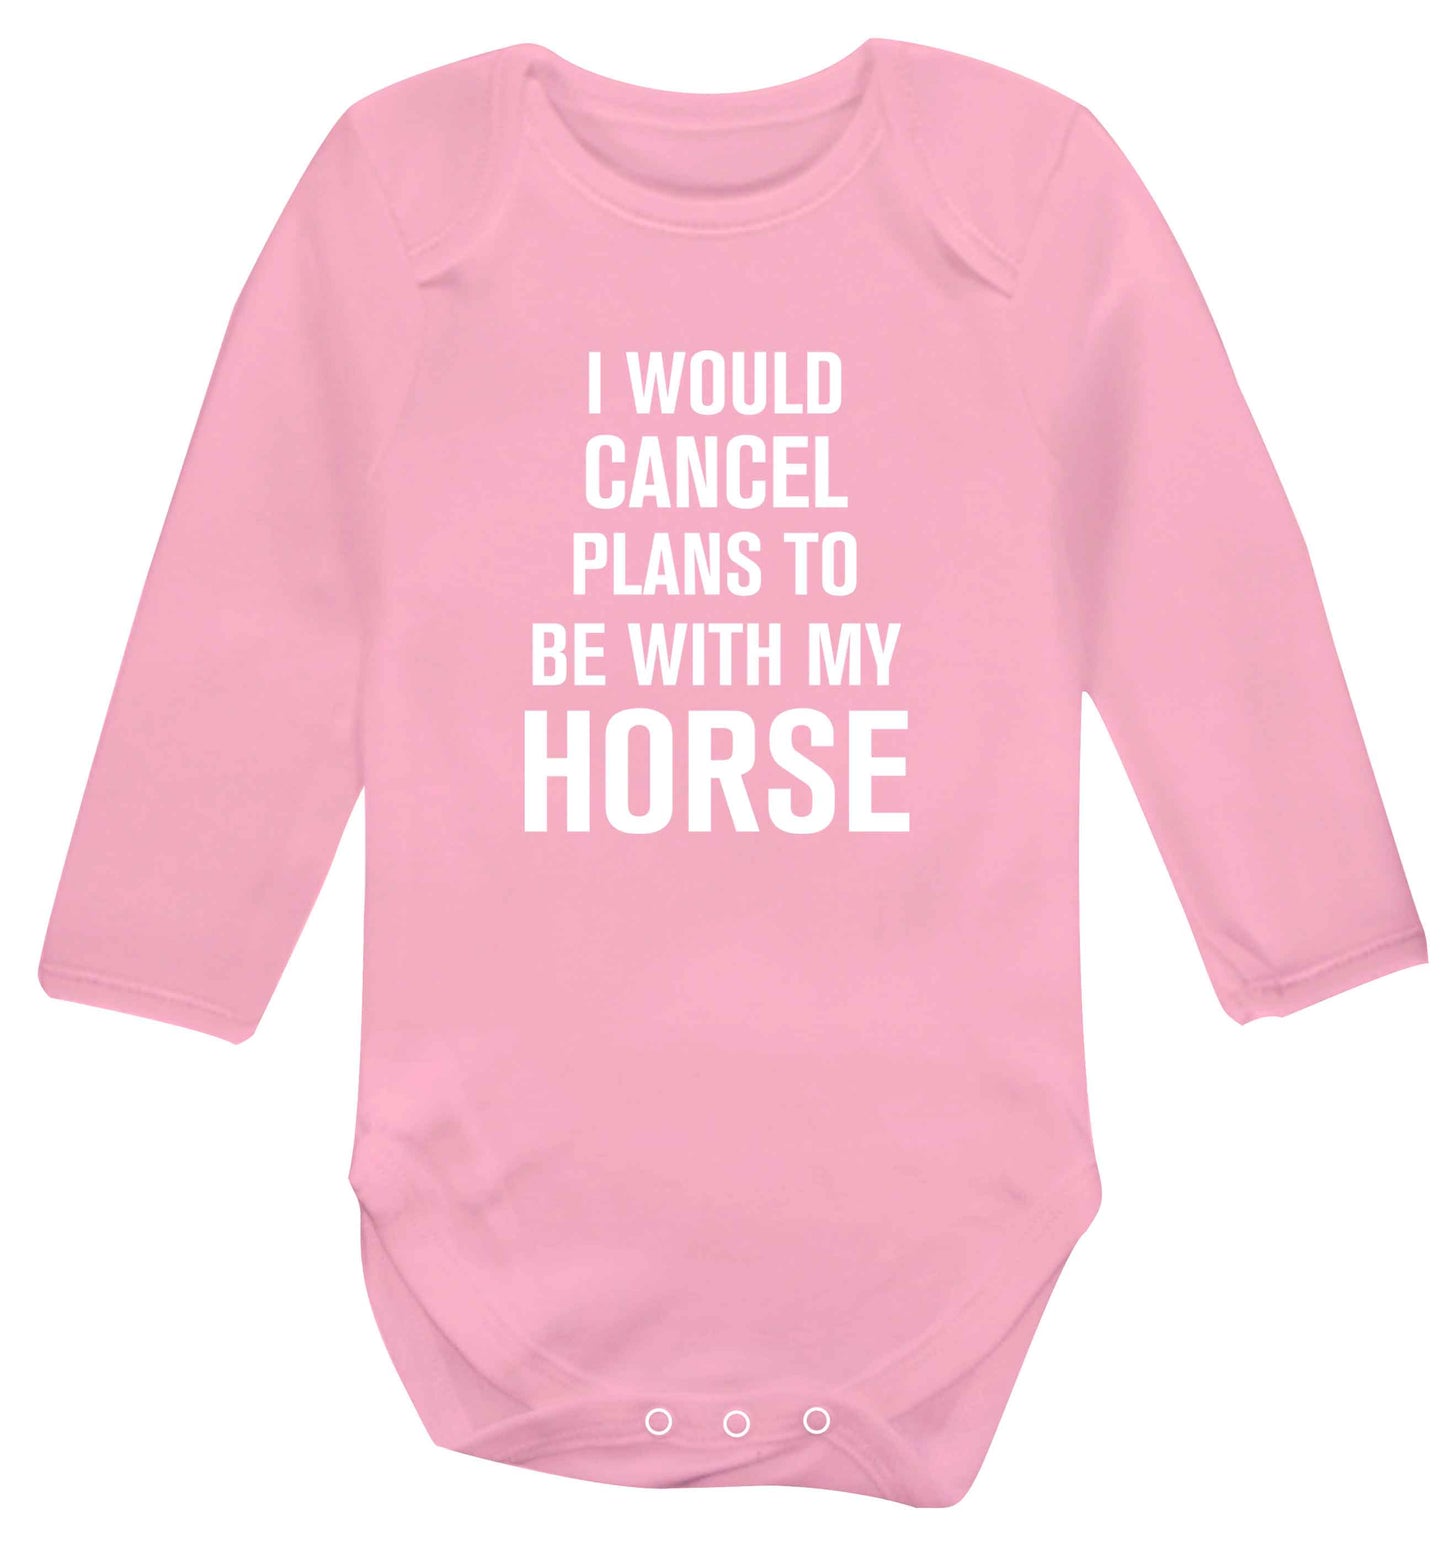 I will cancel plans to be with my horse baby vest long sleeved pale pink 6-12 months